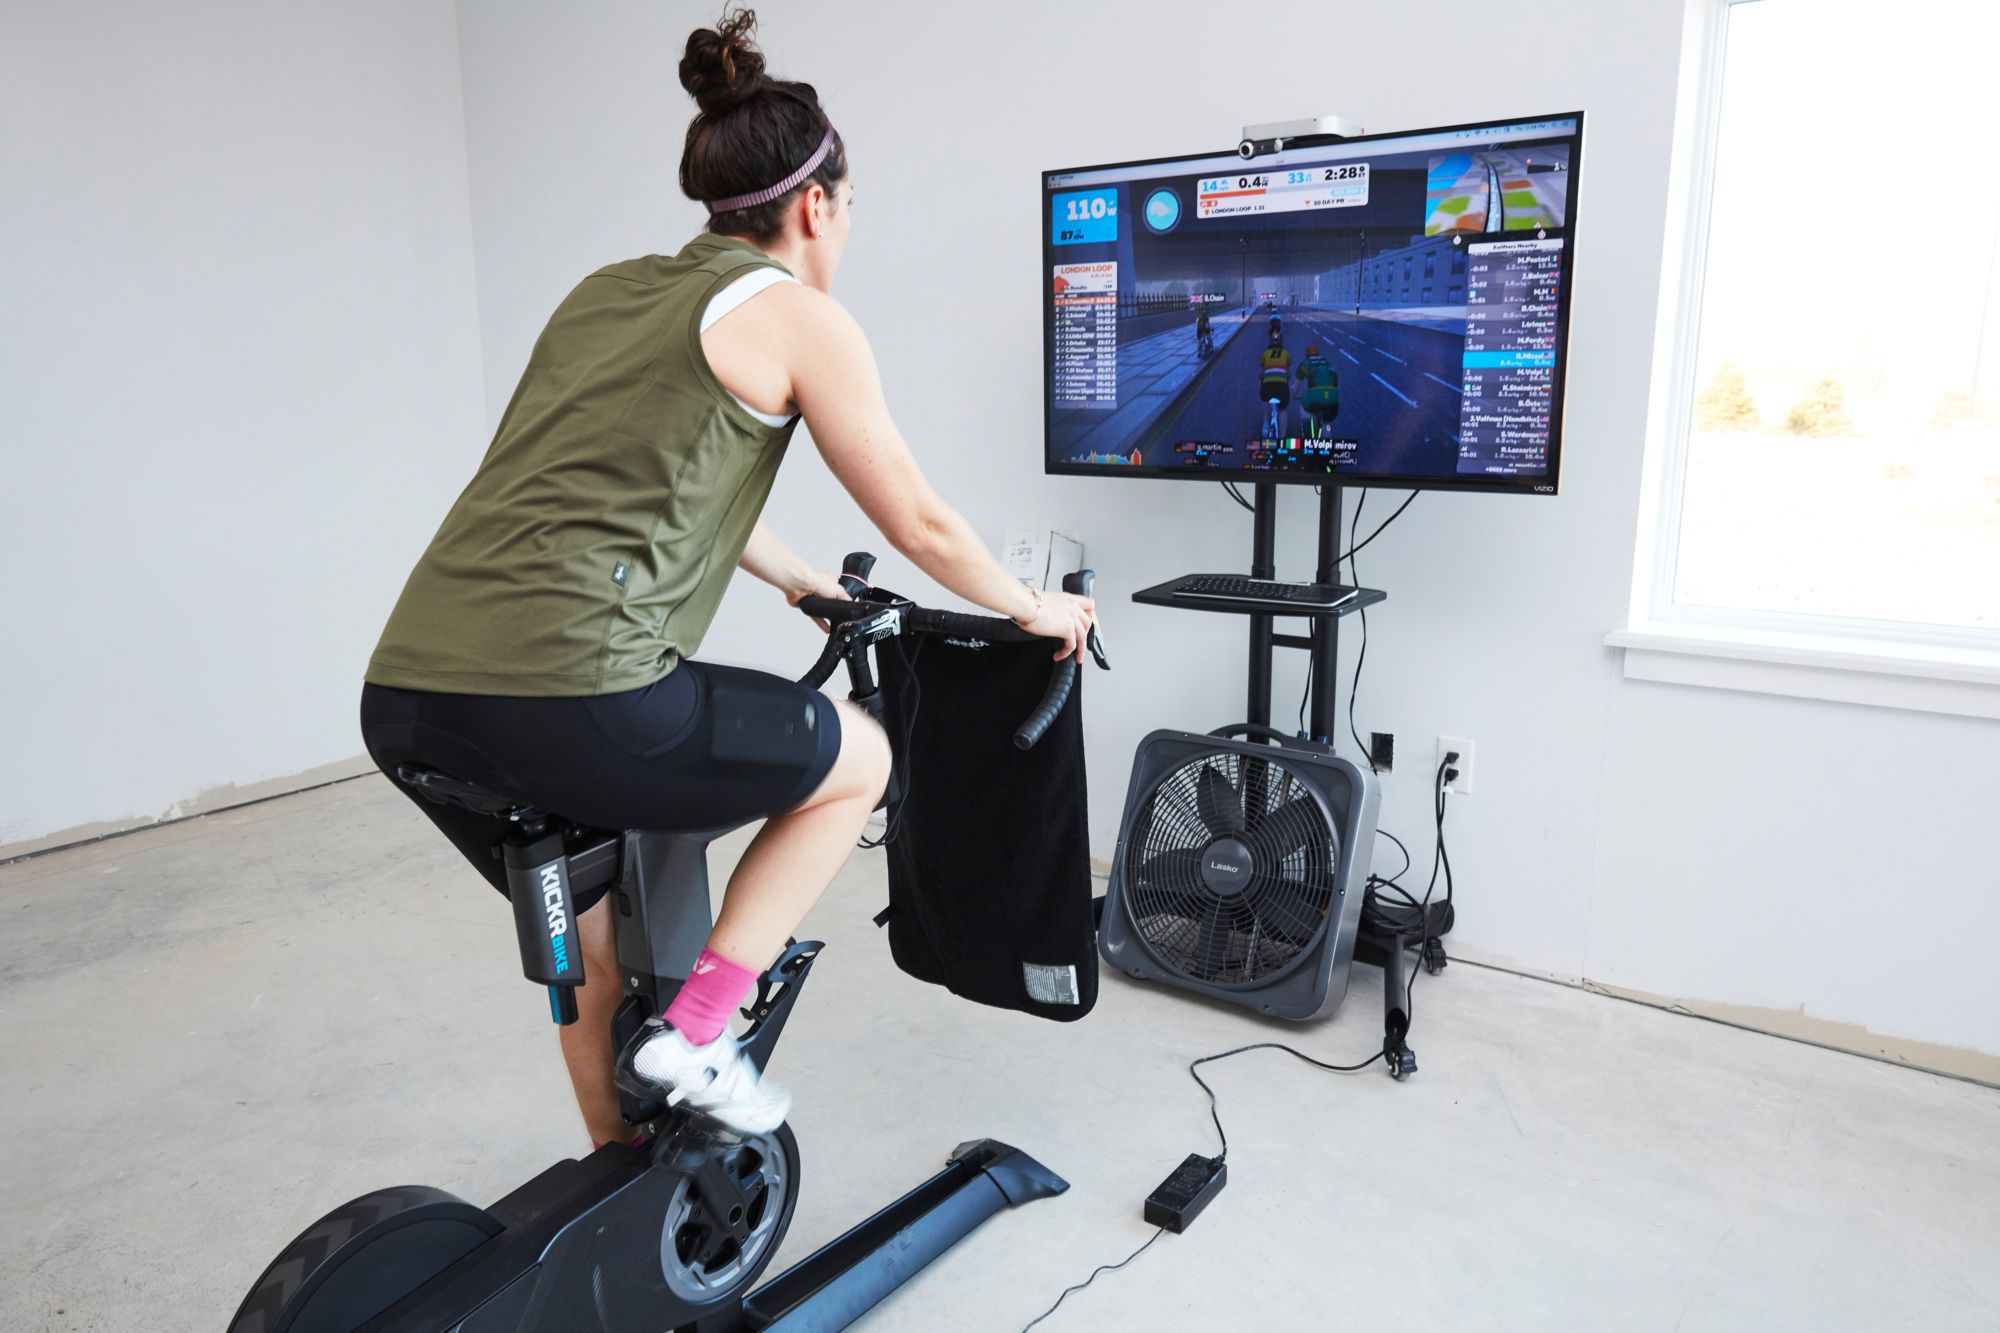 TrainerRoad Adaptive Training Review: The Future Of Faster WIRED ...